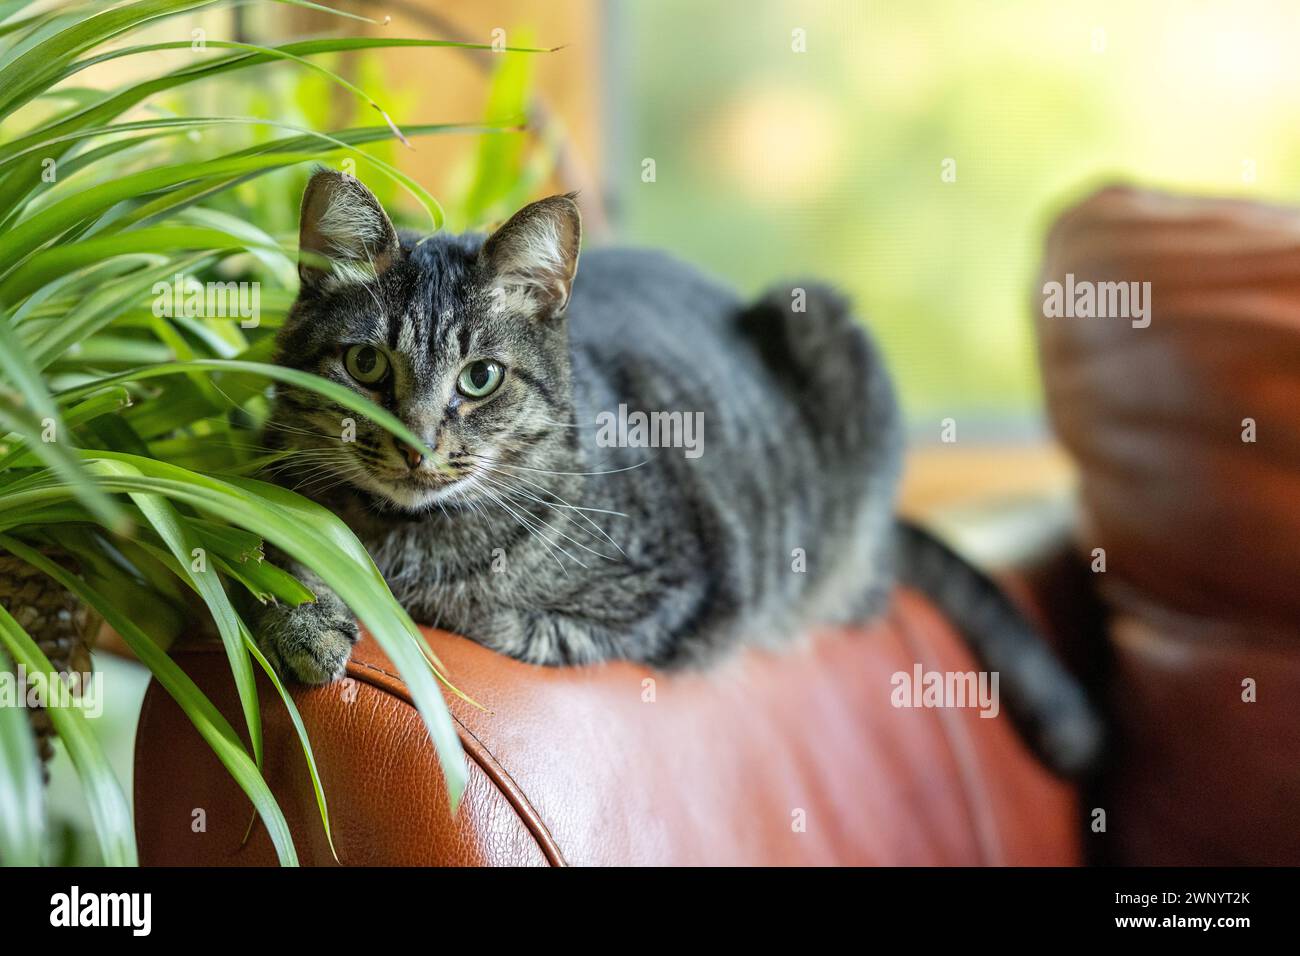 A brown tabby cat peeks out from behind a spider plant houseplant in a home Stock Photo